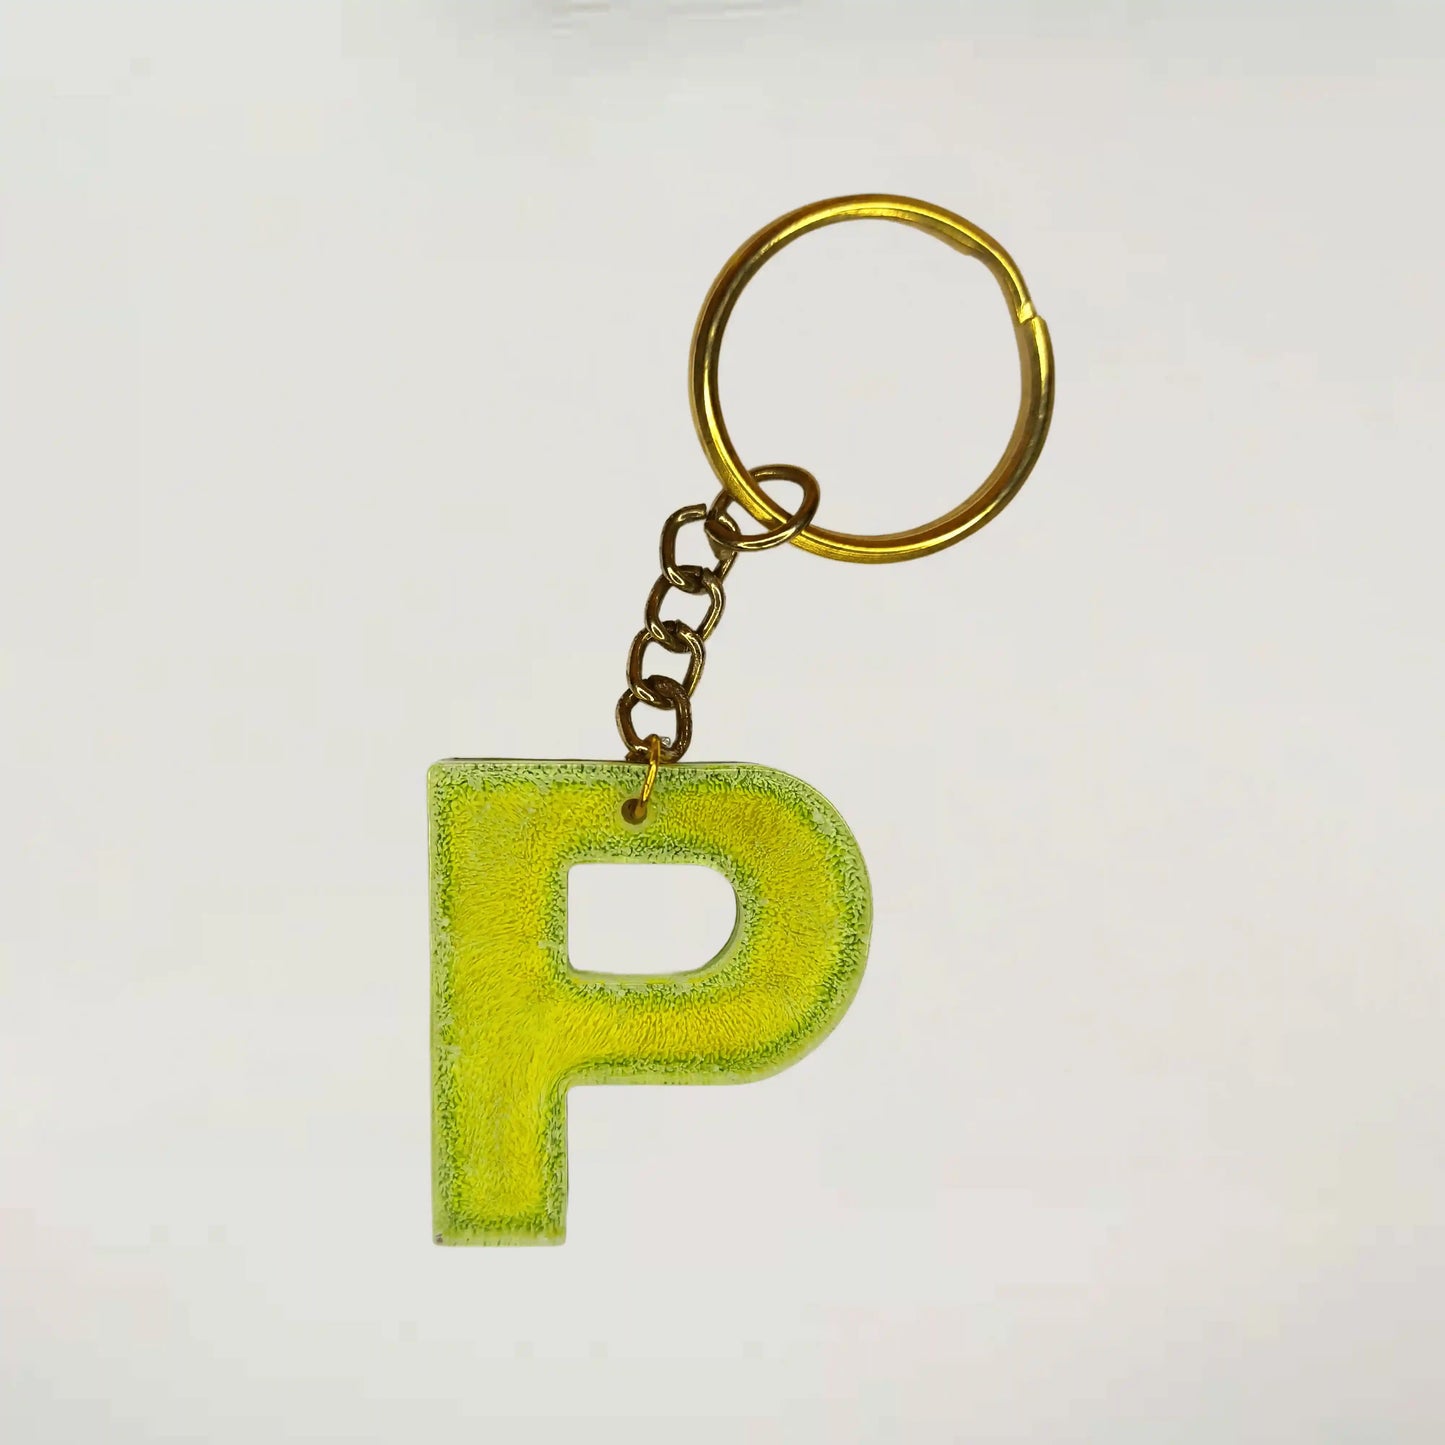 Shop Personalize Yellow Resin keychains with Stunning P-Initials For Couples